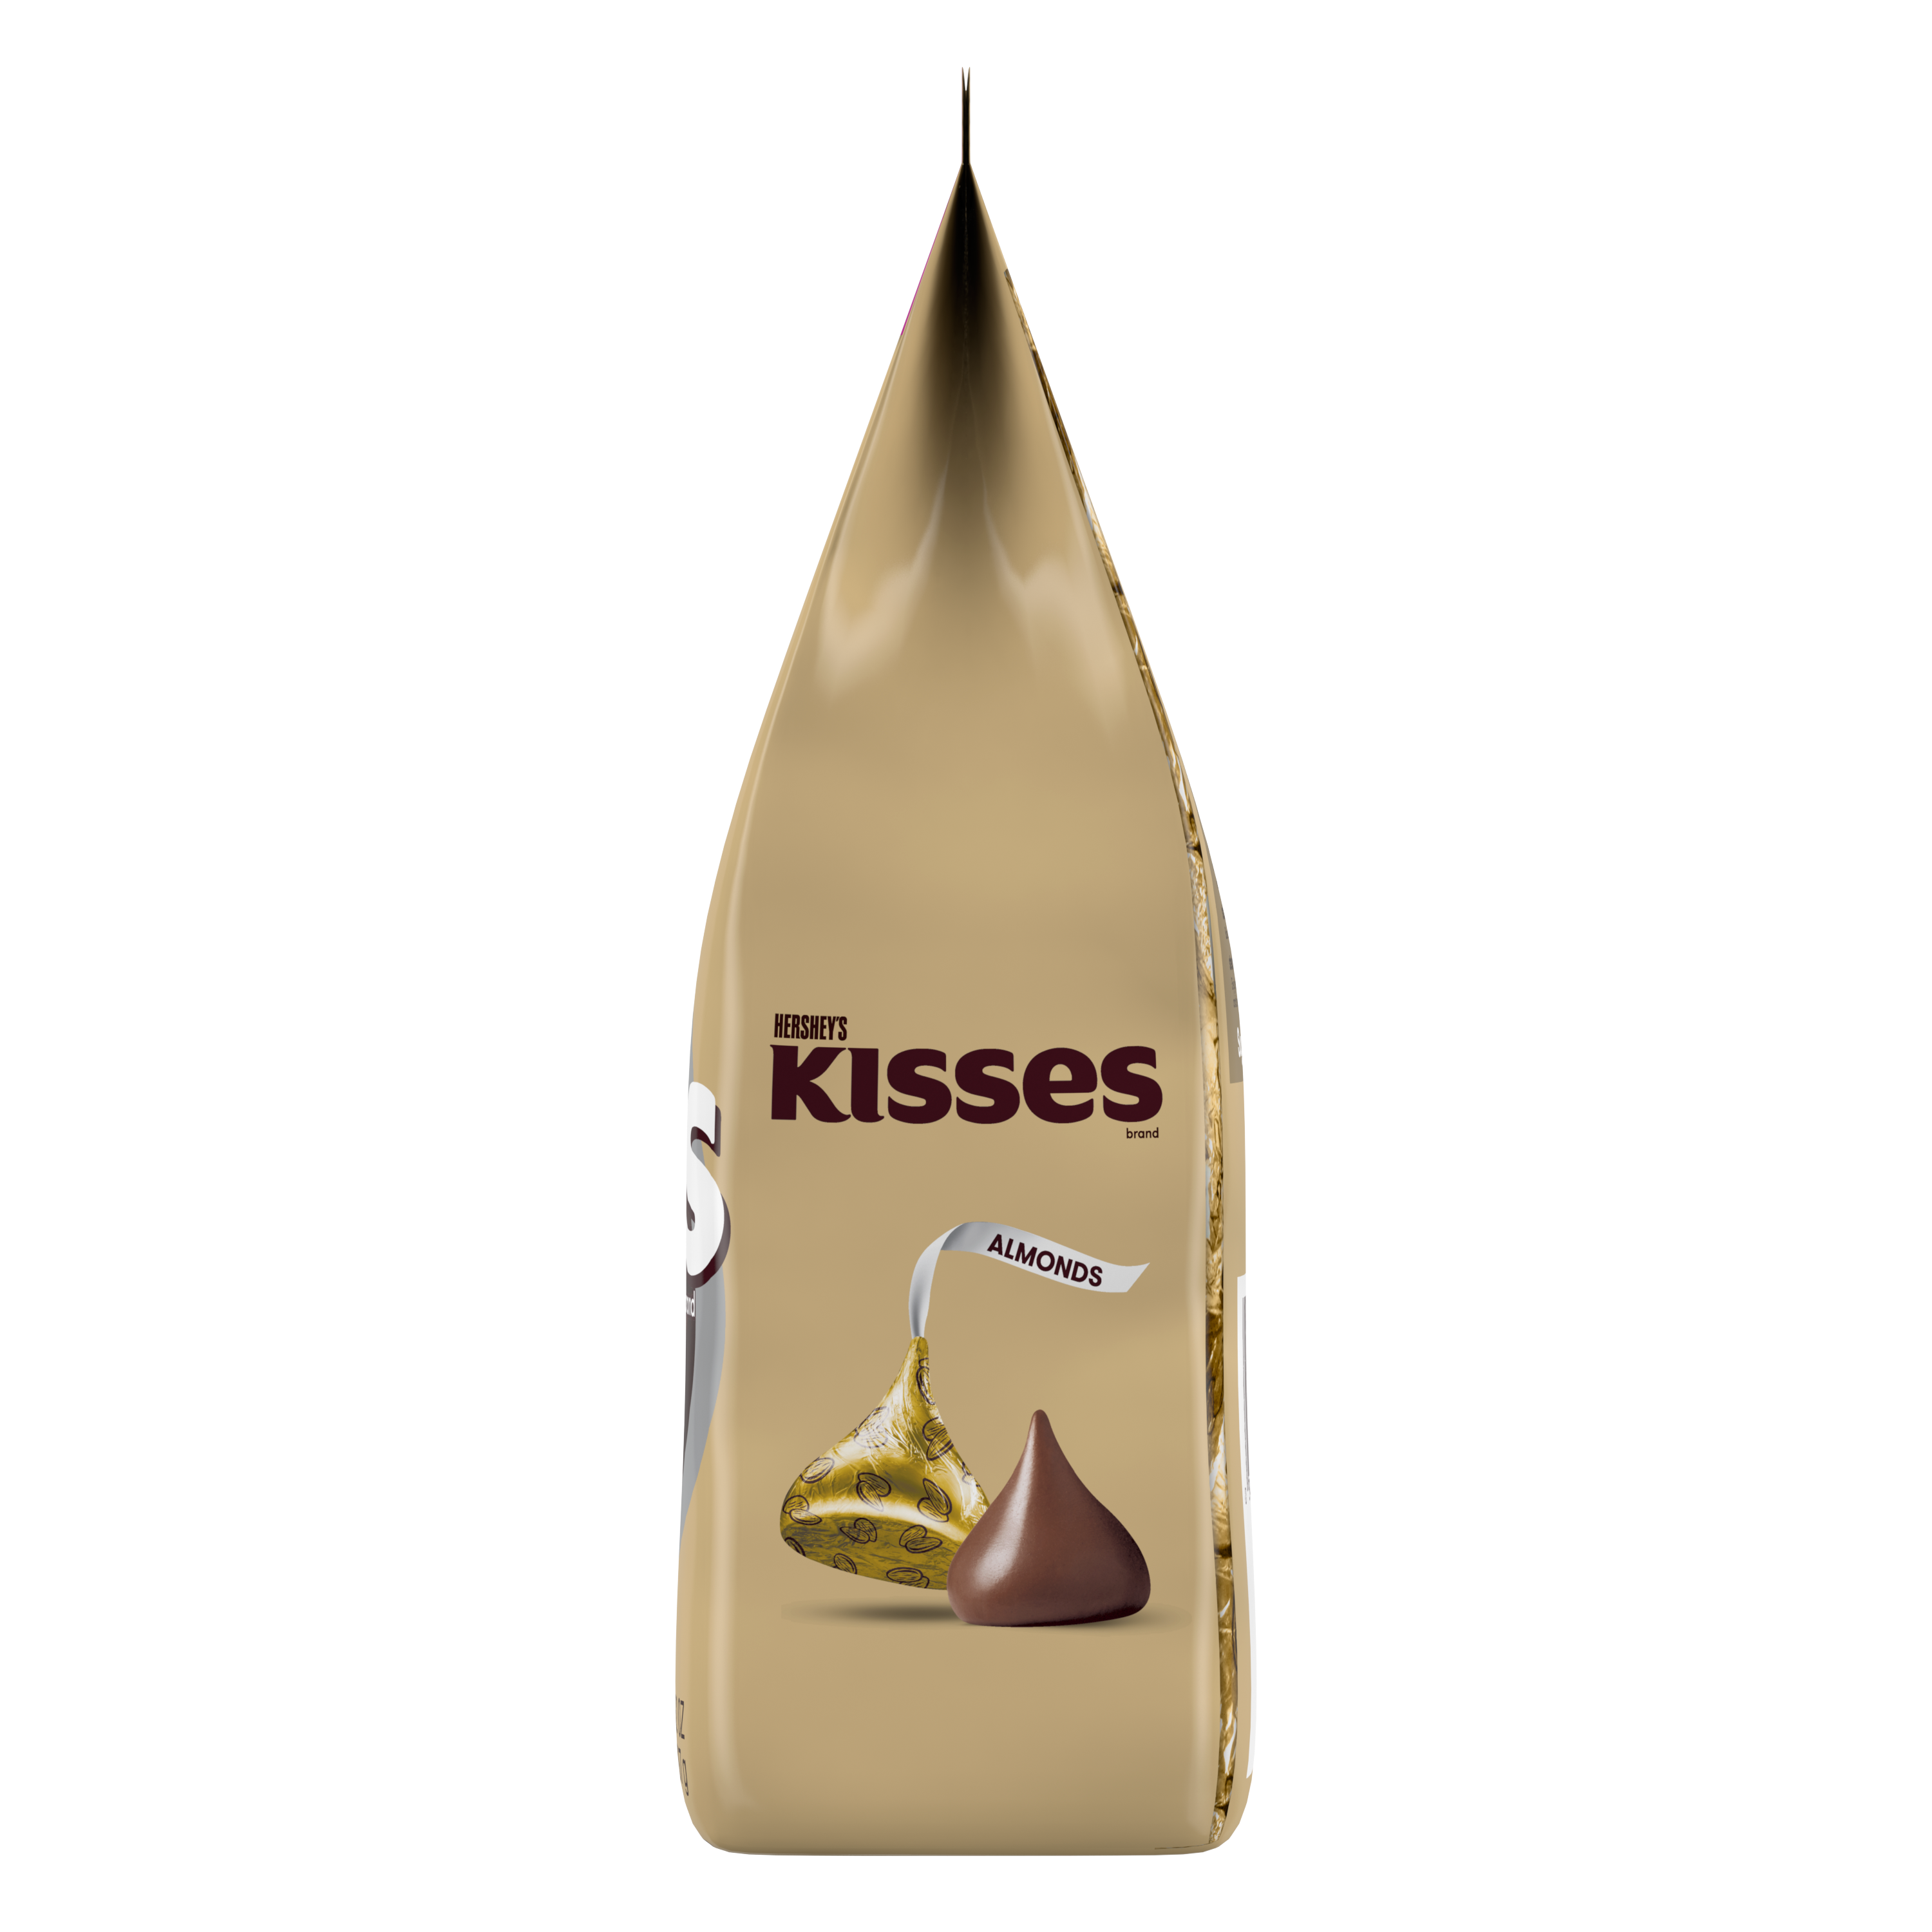 HERSHEY'S KISSES Milk Chocolate with Almonds Candy, 32 oz pack - Side of Package